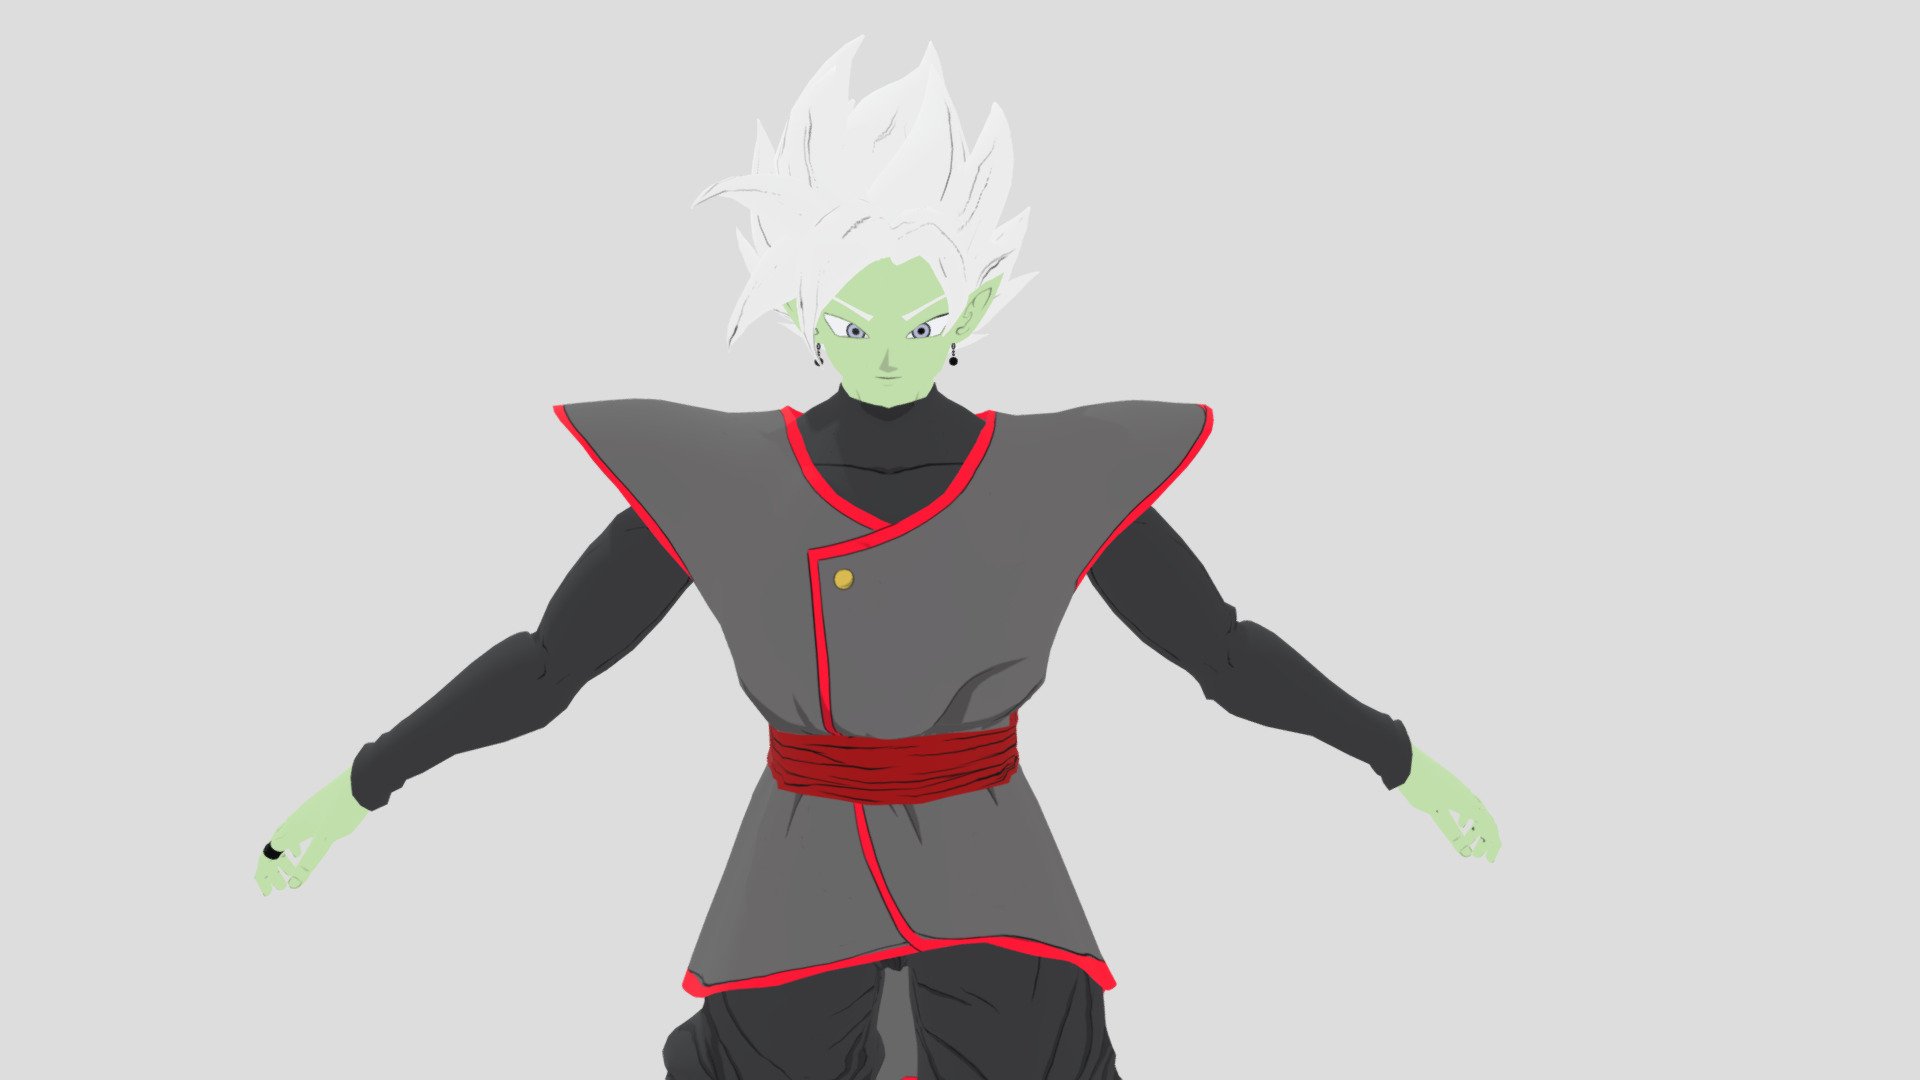 3D rigged Model of Fused Zamasu from Dragonball Super franchise

All Forms Included


Shape-keys for facial expressions

Game-ready and avaiable in both .blend and .fbx file formats

Medium poly

includes all textures

.blend includes a Cel-Shaded Version

Available here

https://www.artstation.com/flamelex/store




Model Specfications
Objects : 18
Faces : 13,673
Vertcies : 14,107
Triangles: 27,258
Bones: 218
Textures: 12
Textures dimensions: between 2048x2048 and 4072x4072 (depending on the object) - Fused Zamasu Rigged - 3D model by Flamelex 3d model